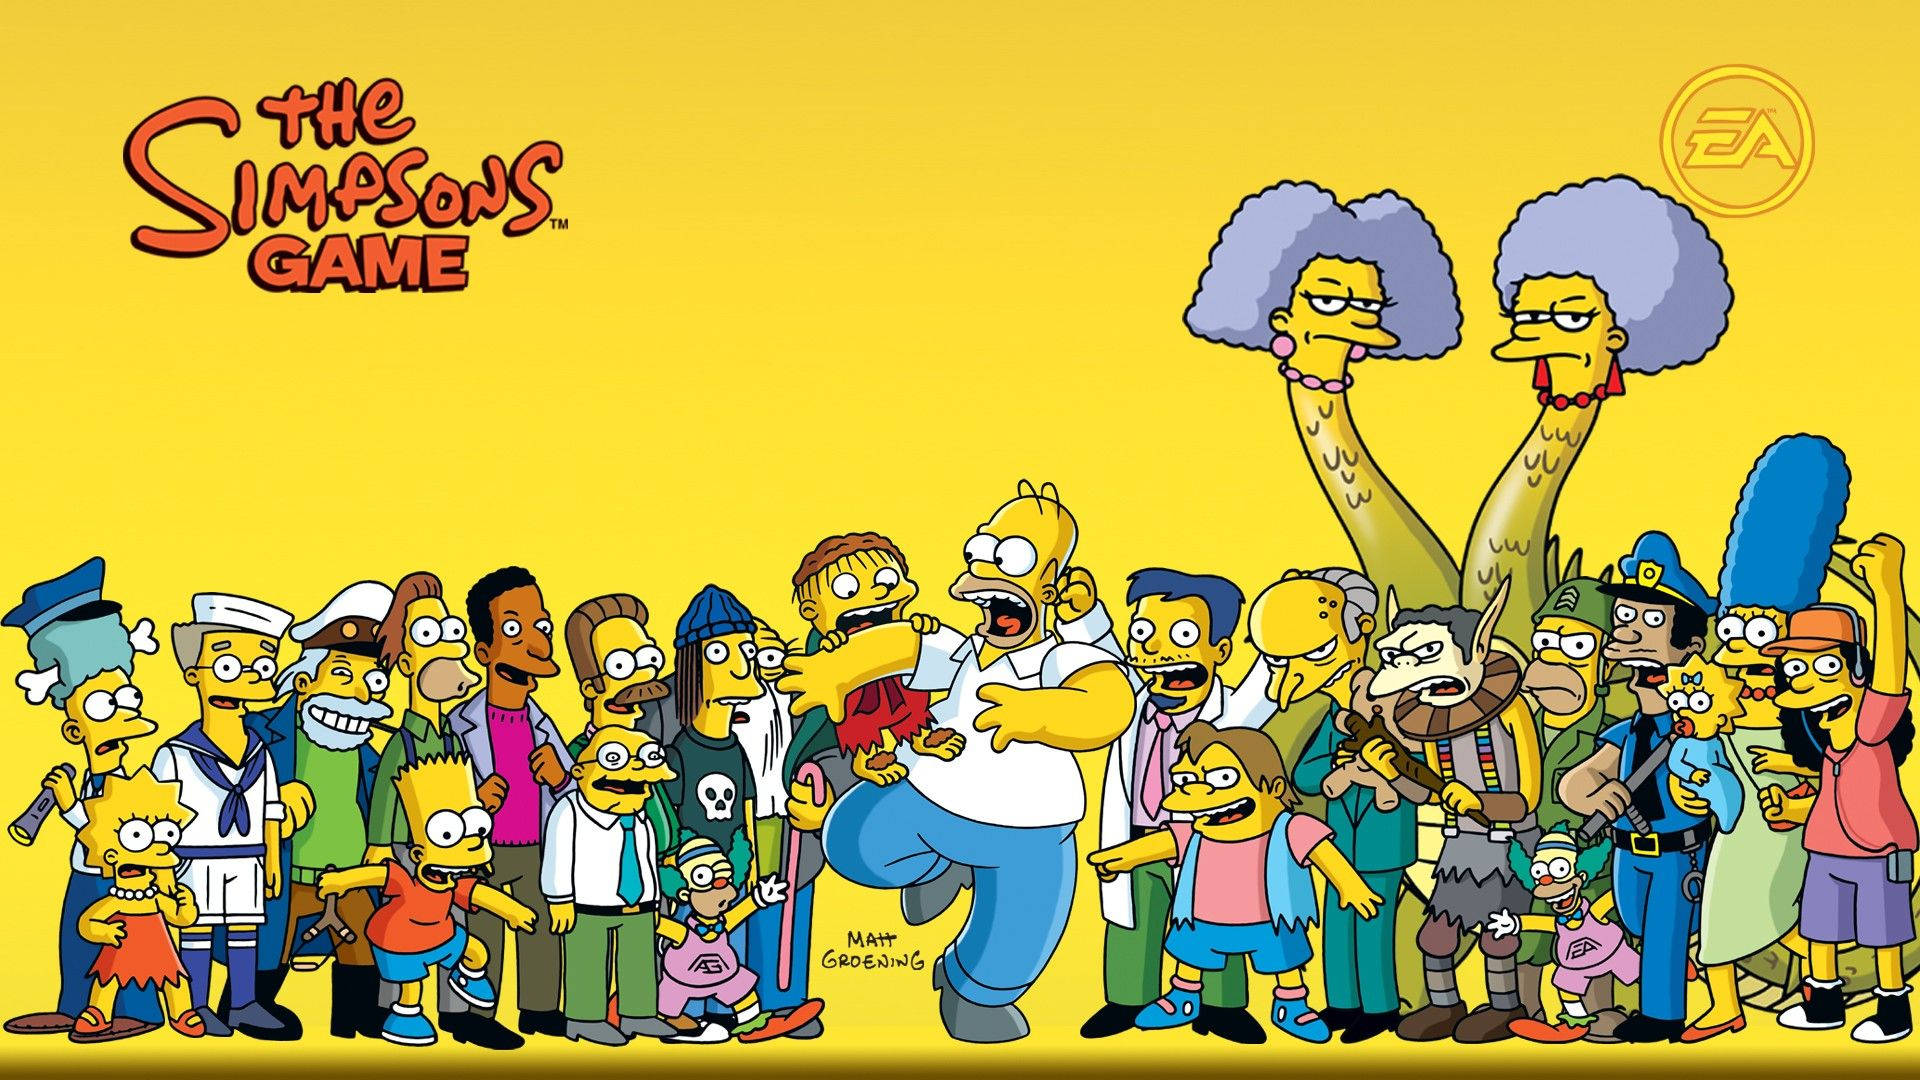 Marge Simpsons The Simpsons Game Background